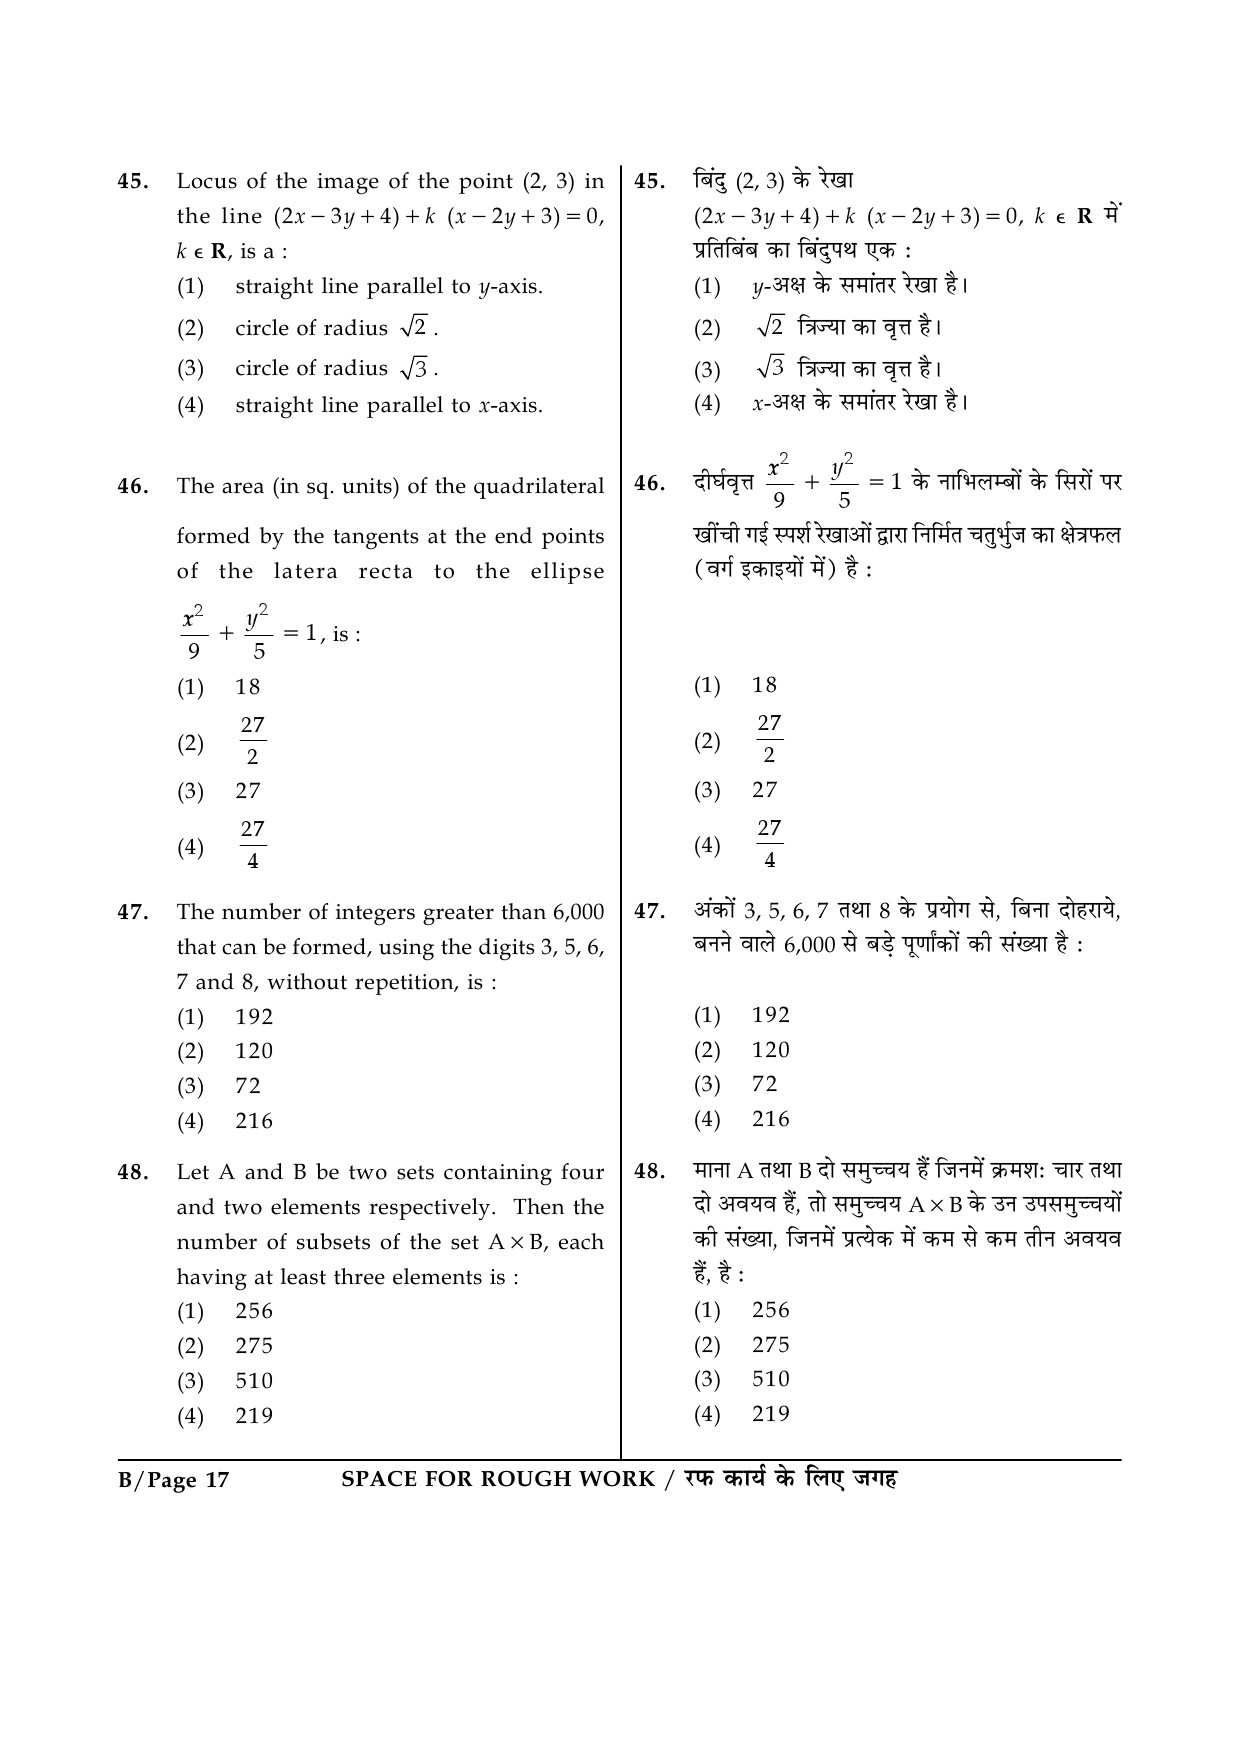 JEE Main Exam Question Paper 2015 Booklet B 17